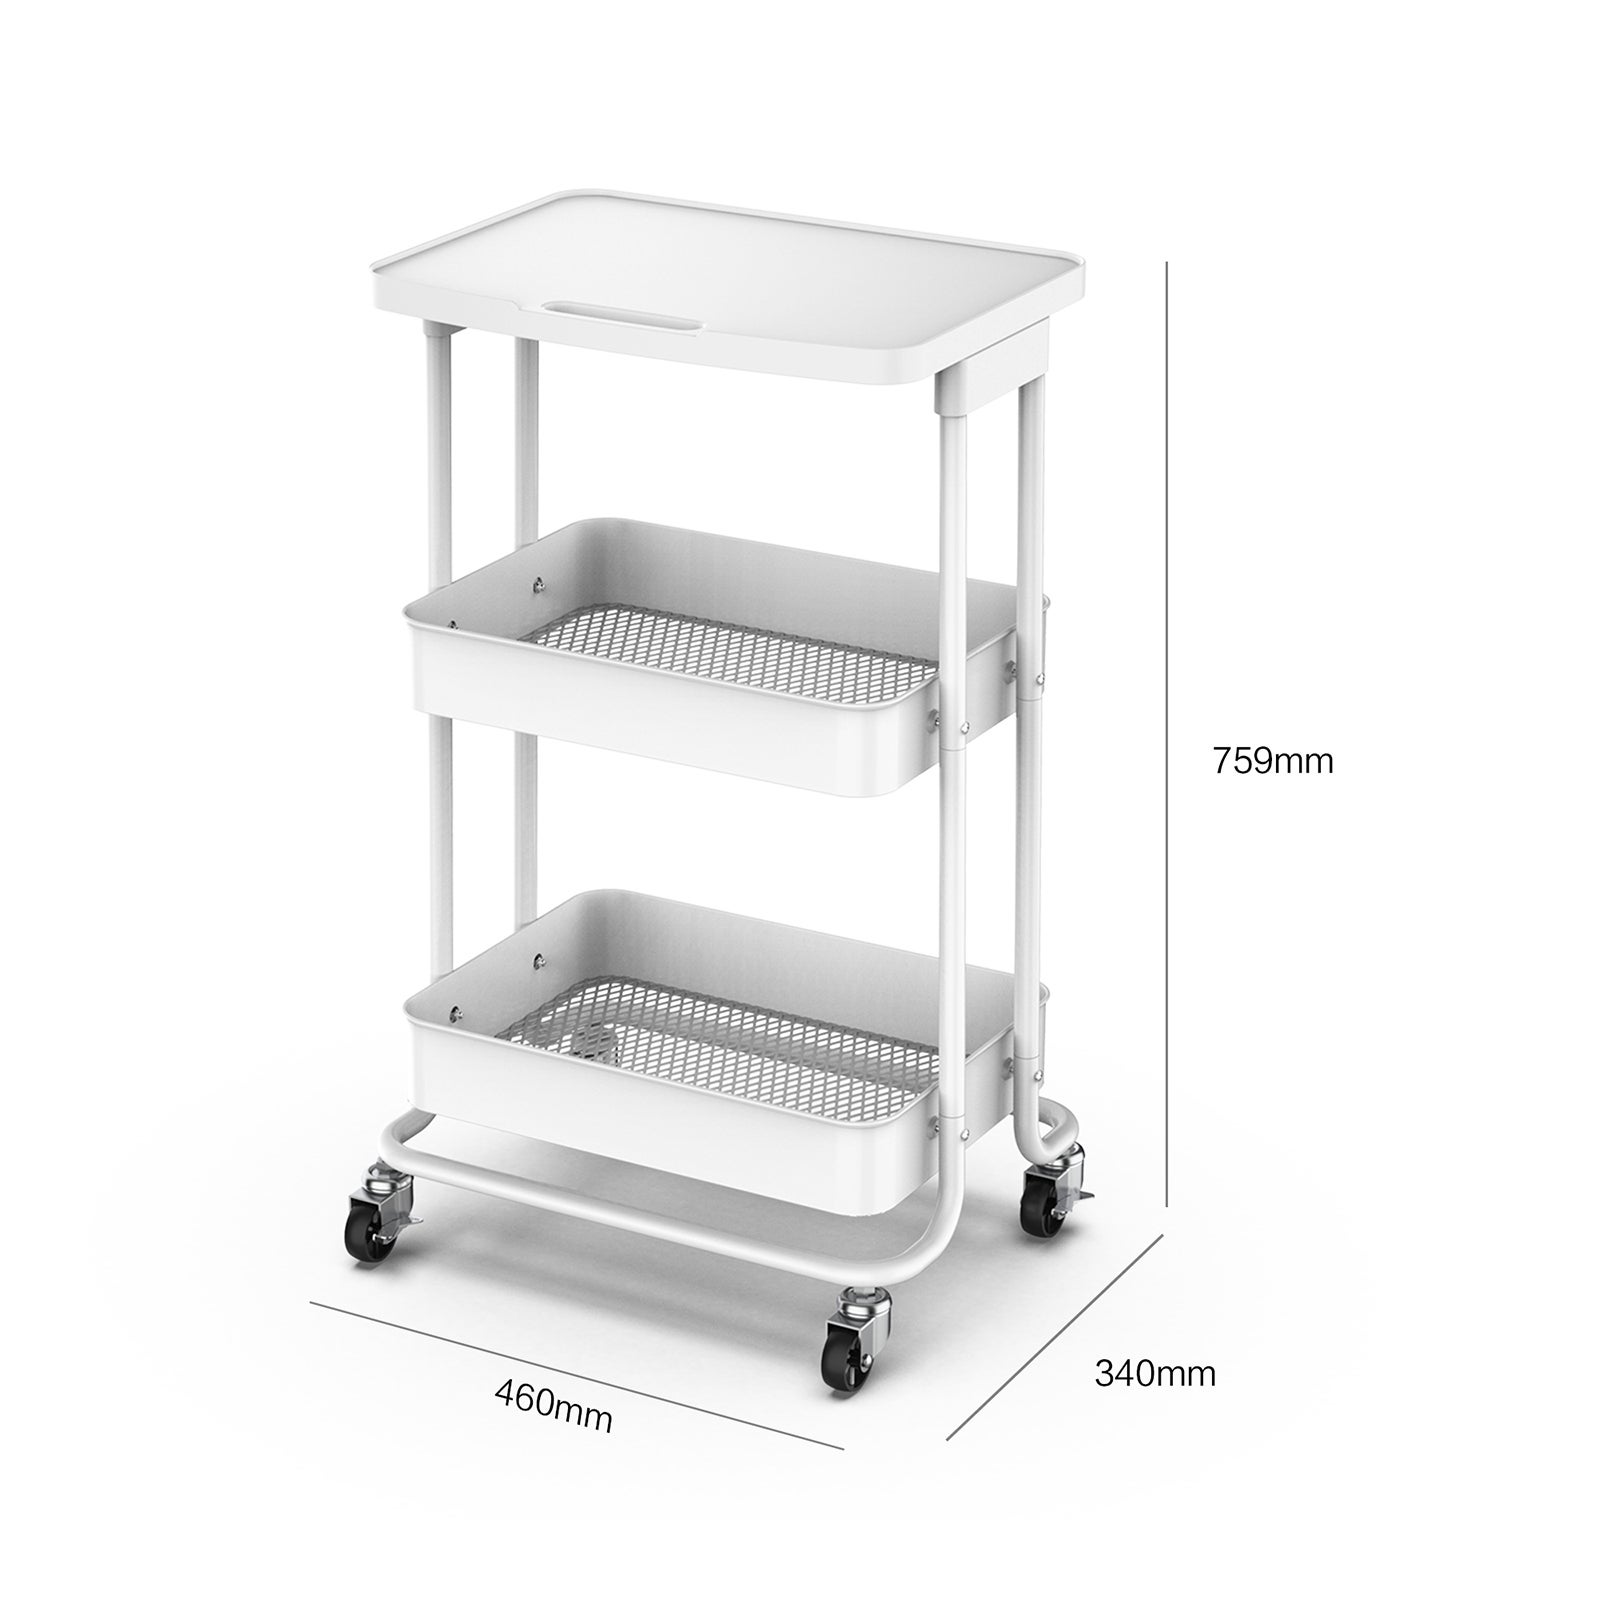 Live It Multi-Purpose Utility Storage Organiser Trolley with Plastic Bench Top